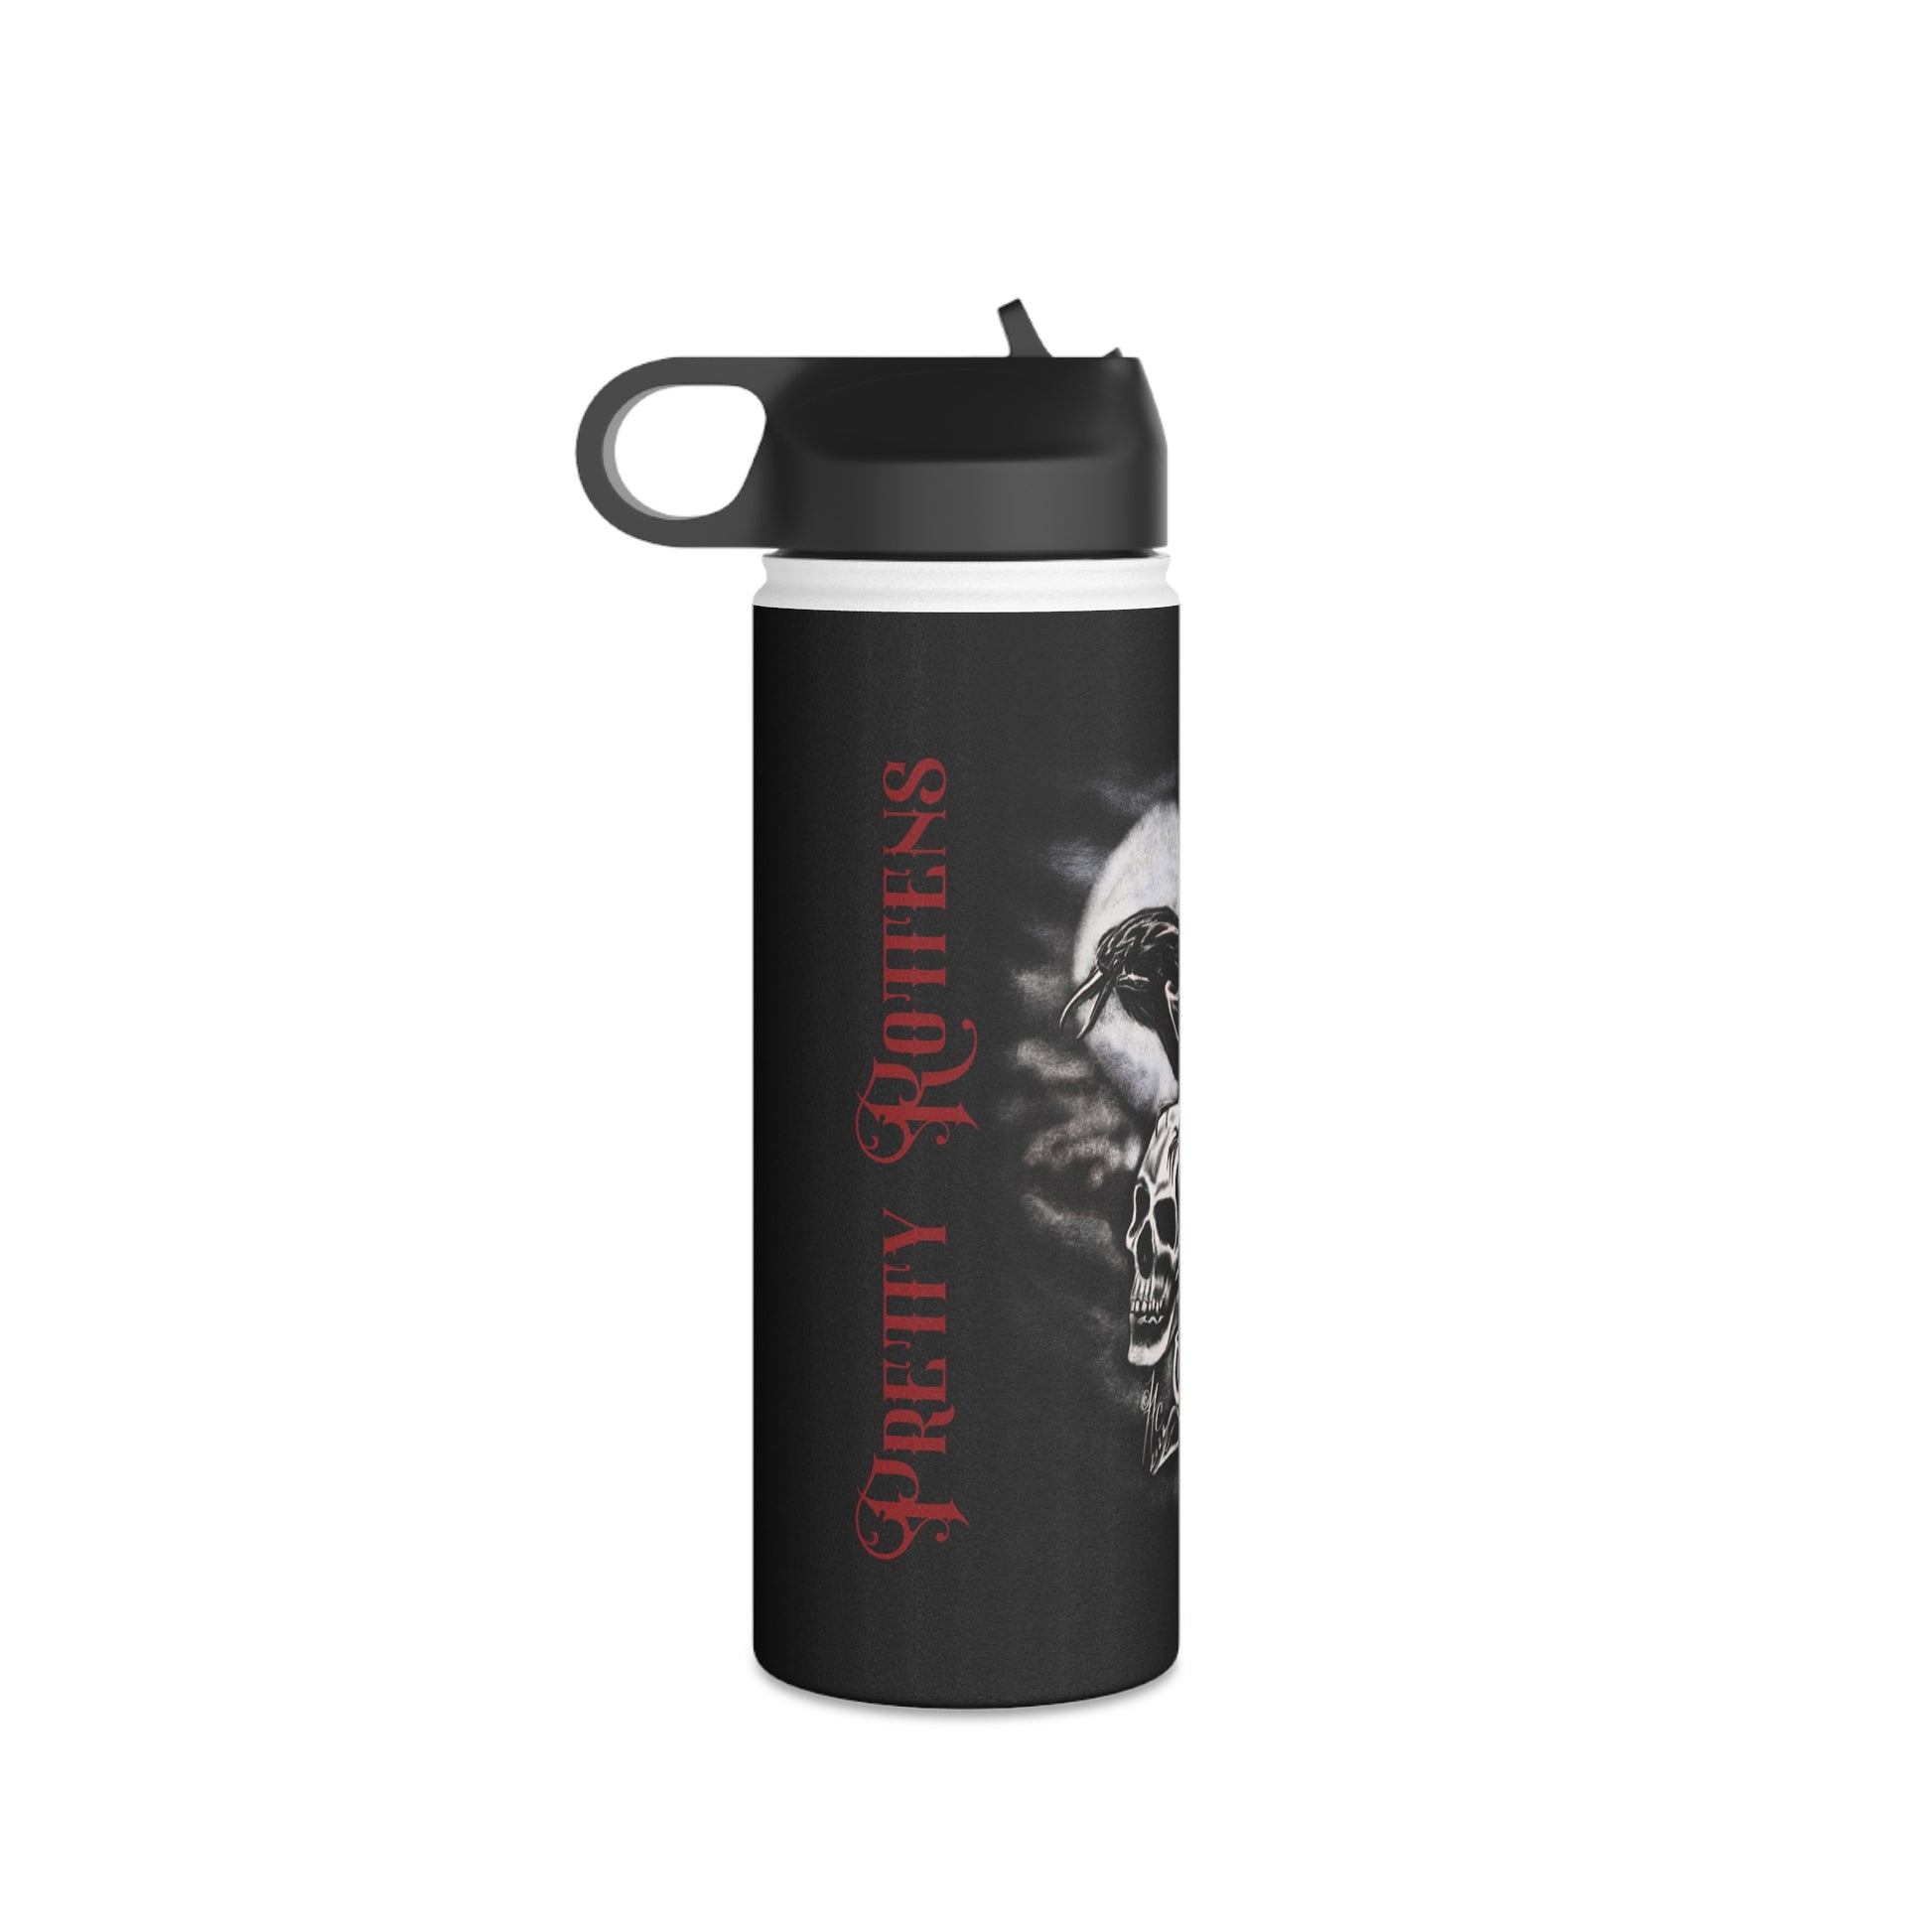 moonlit crow on skull with red rose reusable water bottle